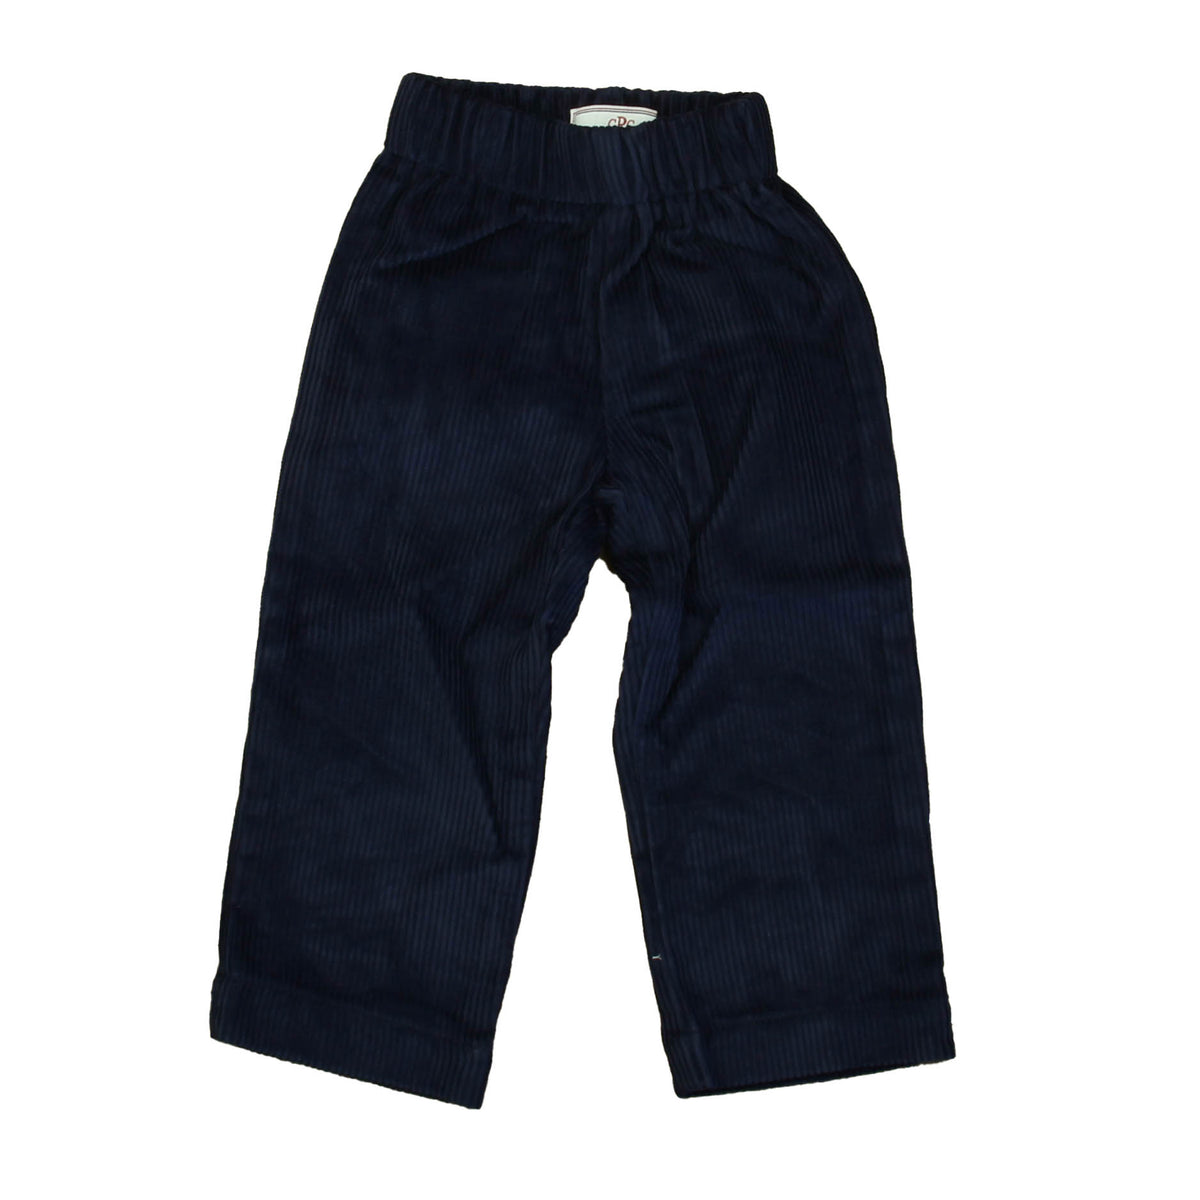 New with Tags: Medieval Blue Pants -- FINAL SALE